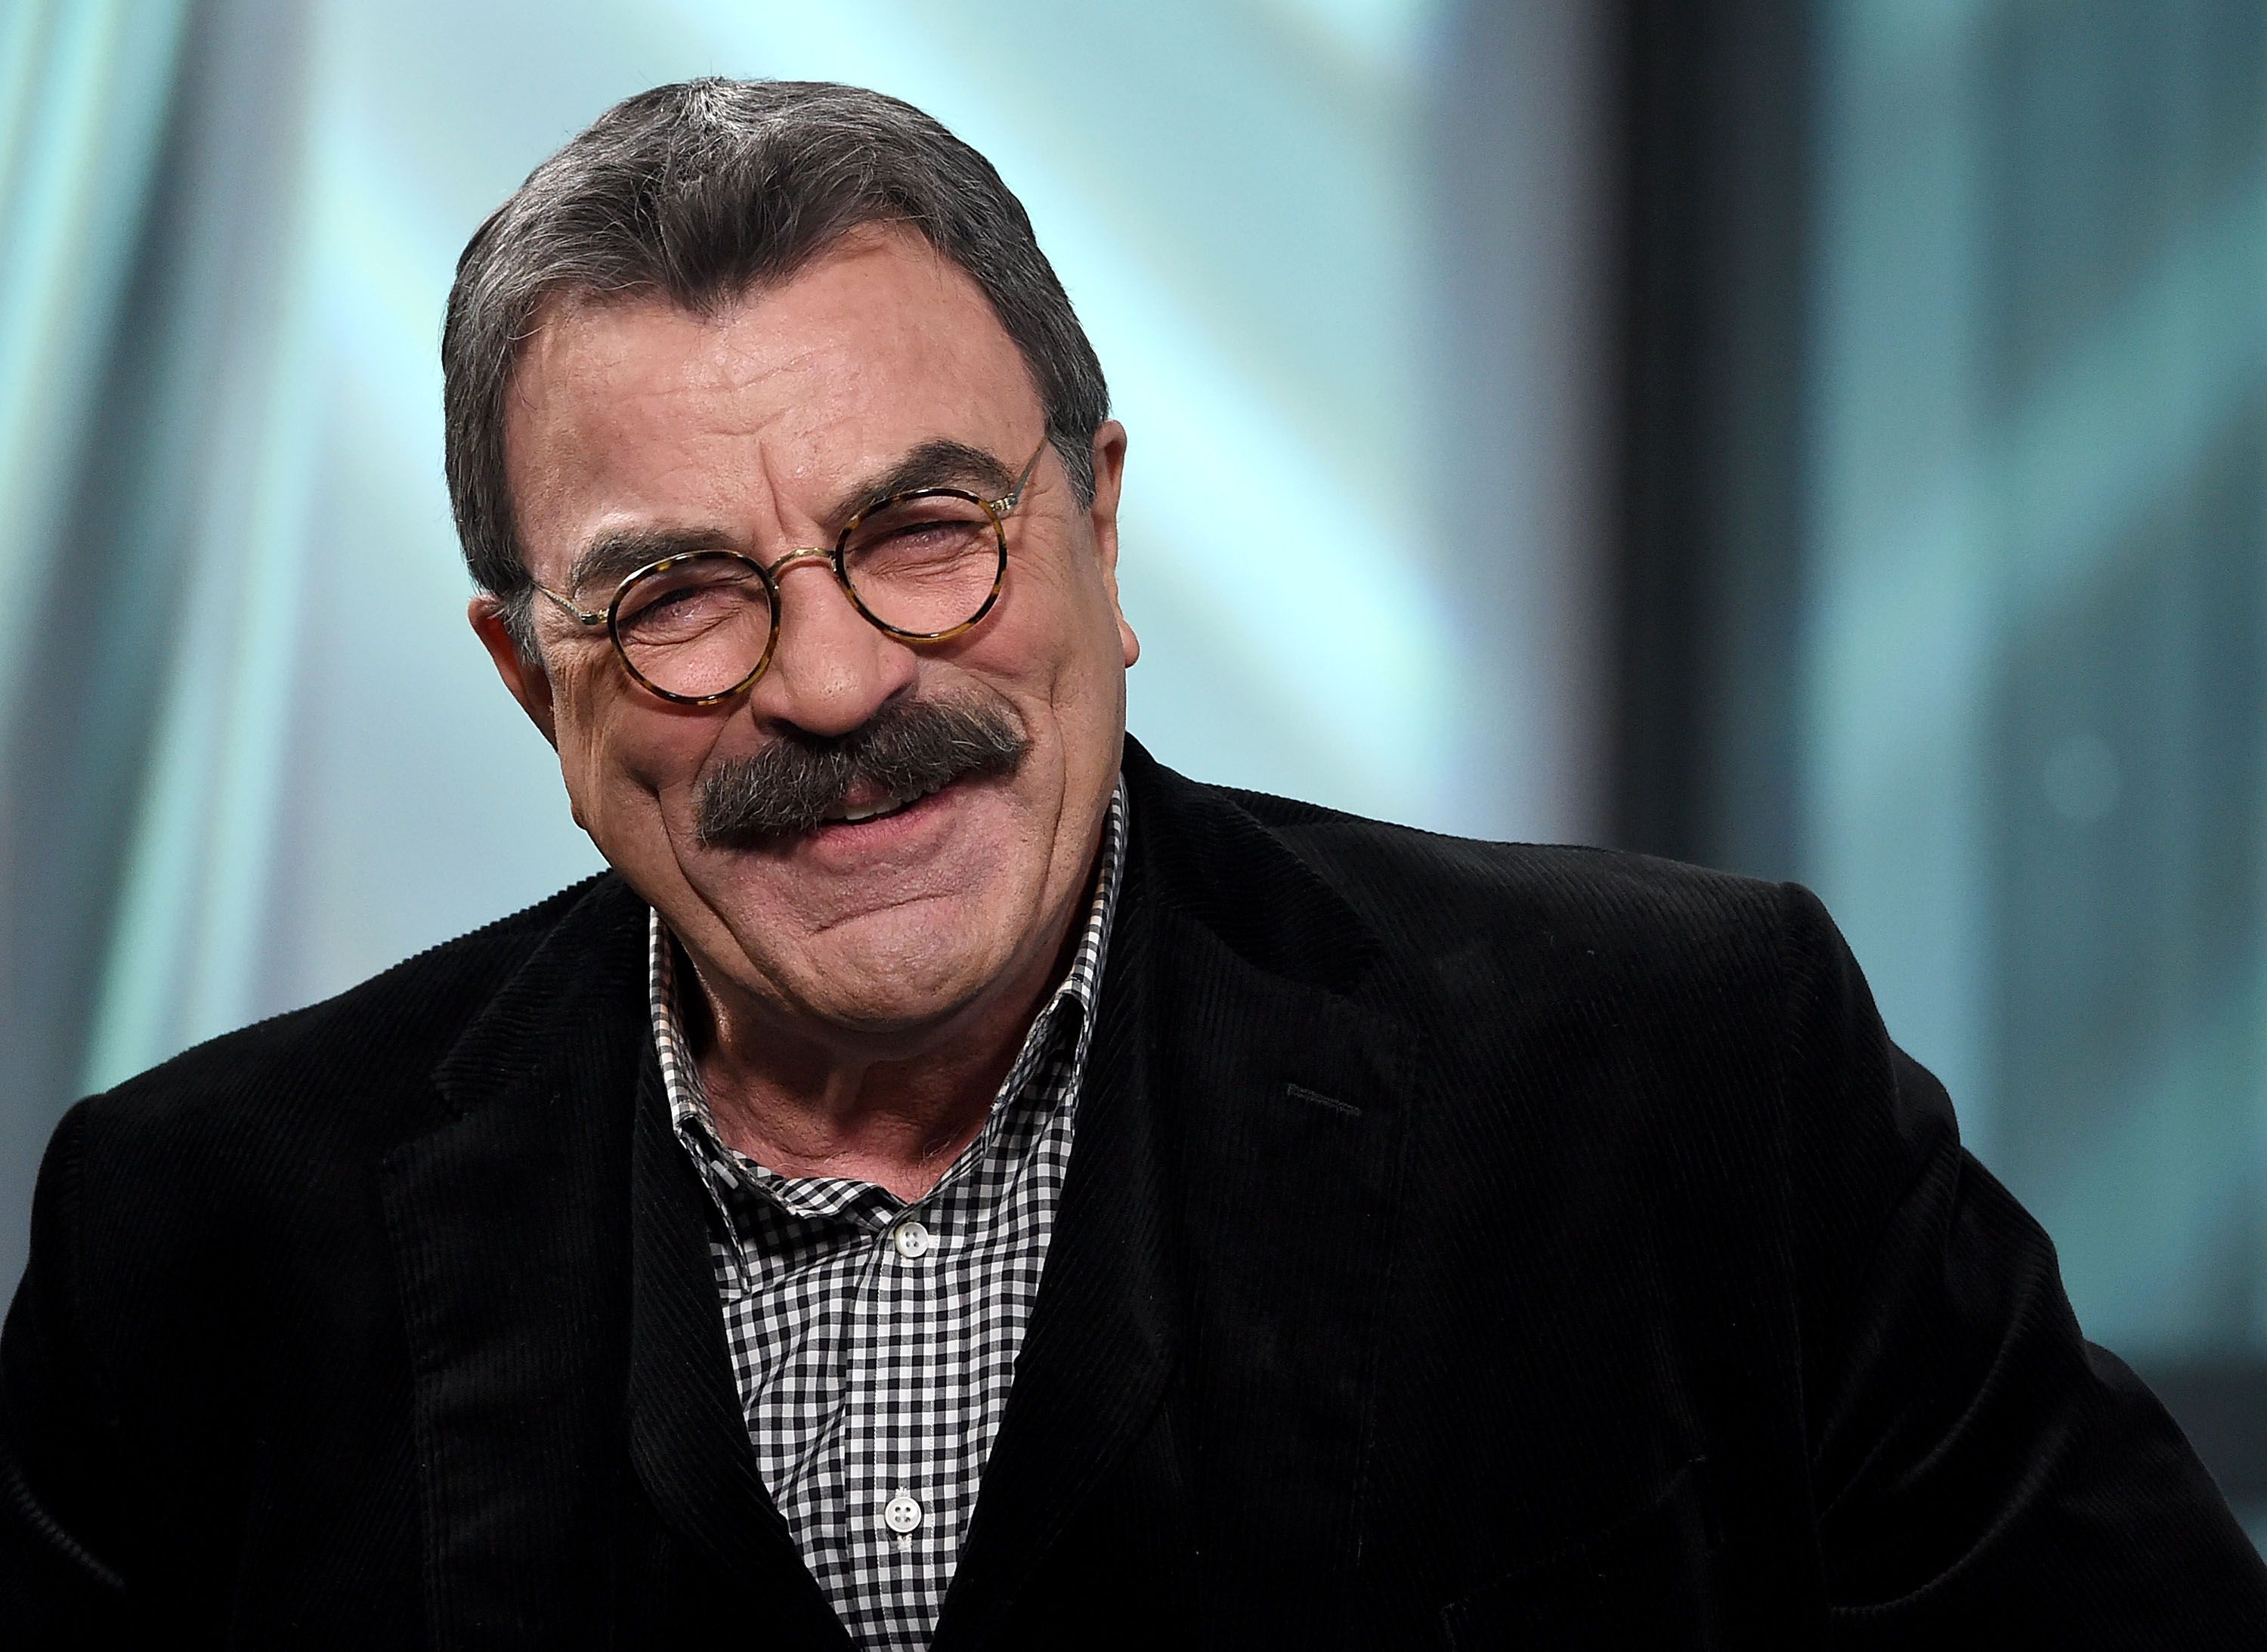 Tom Selleck at the Build Series to discuss his show "Blue Bloods at Build Studio on September 29, 2017 | Photo: Getty Images